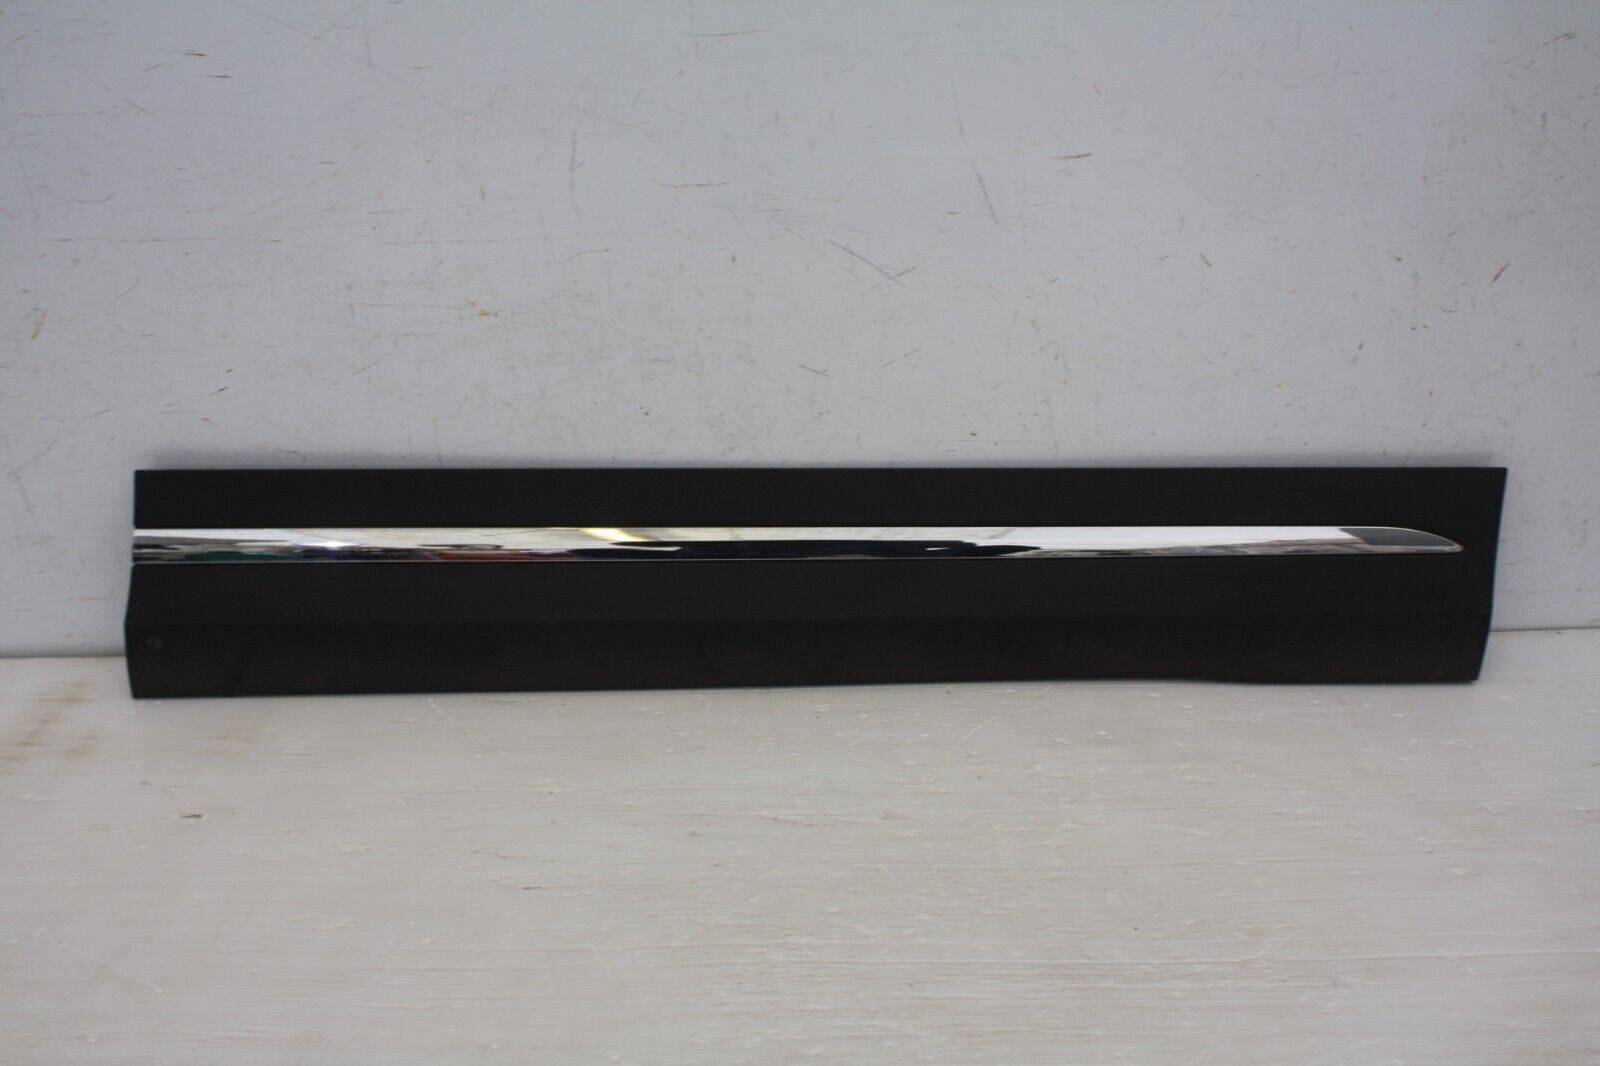 Mercedes GLA H247 Front Right Door Moulding 2020 ON A2477271501 Genuine 175803039040